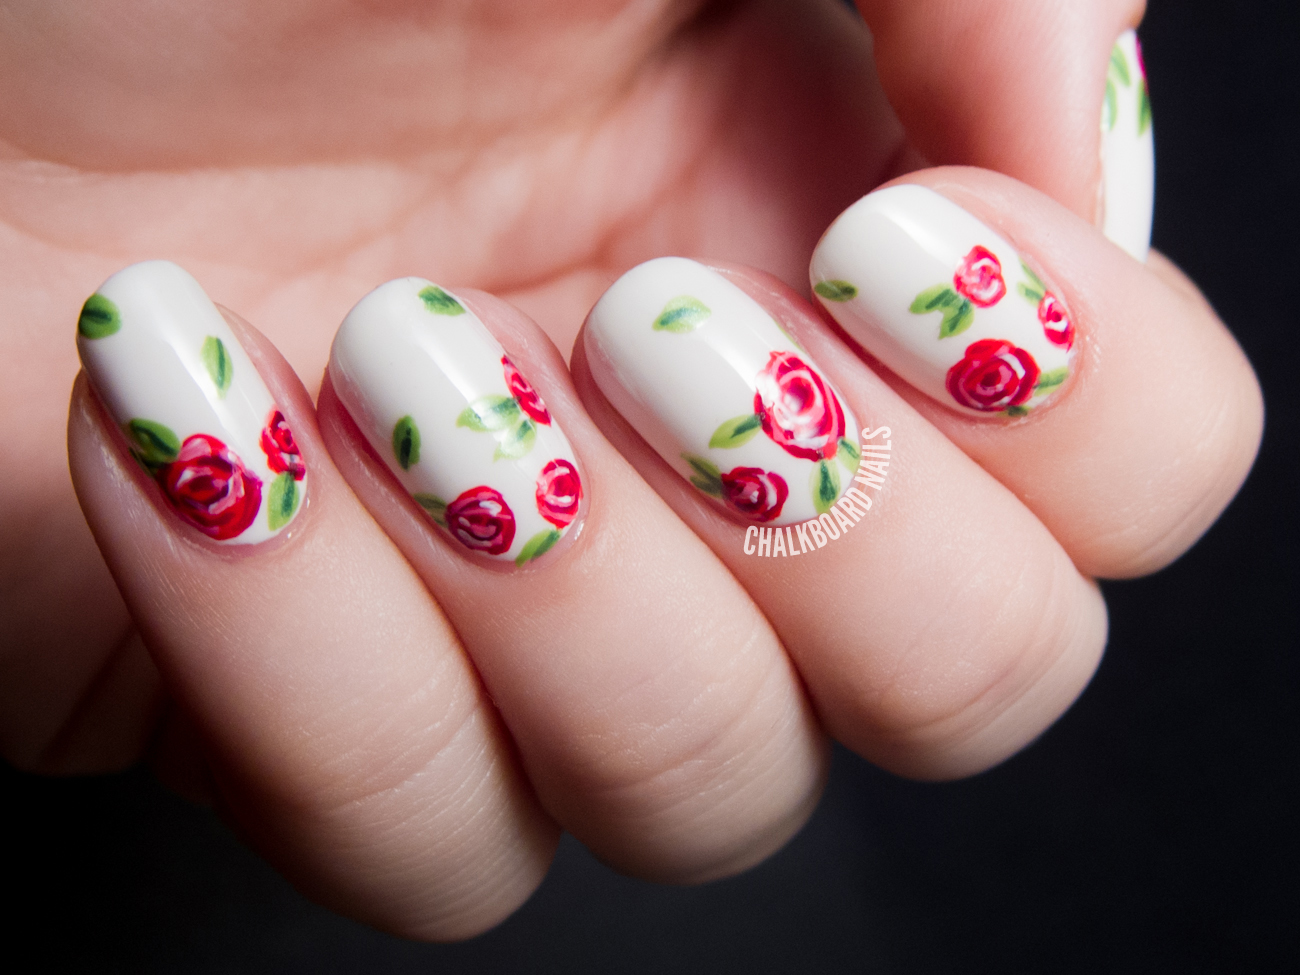 3. "Elegant Rose Nail Design with Crystal Accents" - wide 3